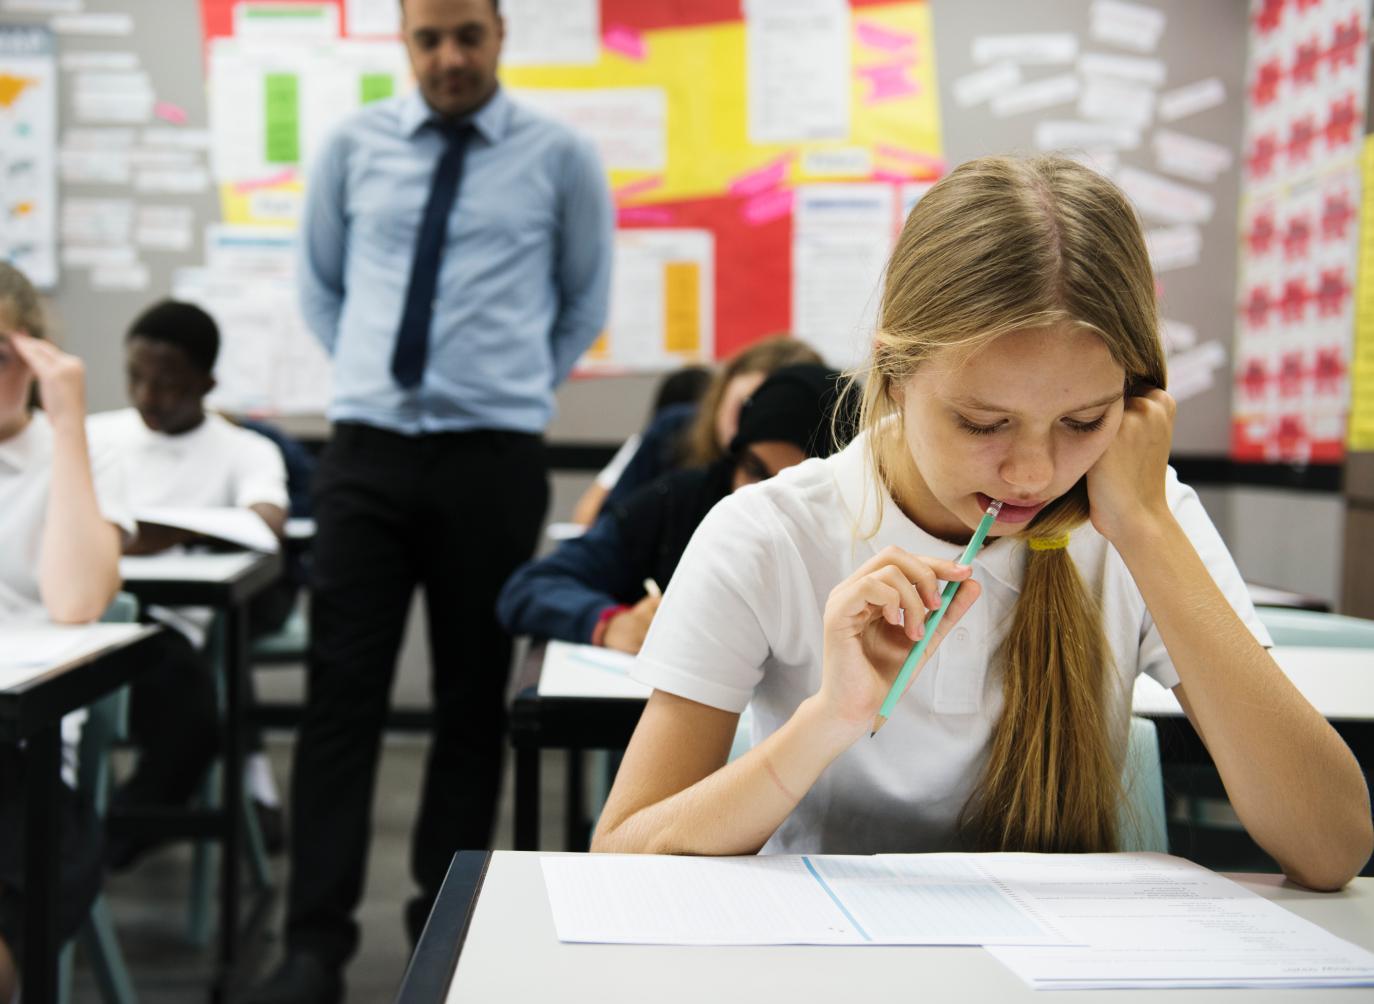 Schoolgirl in white polo top chewing the end of a green pencil while looking at exam sheets on a desk in front of her. In the background, a teacher is walking up the aisle between students' desks. 